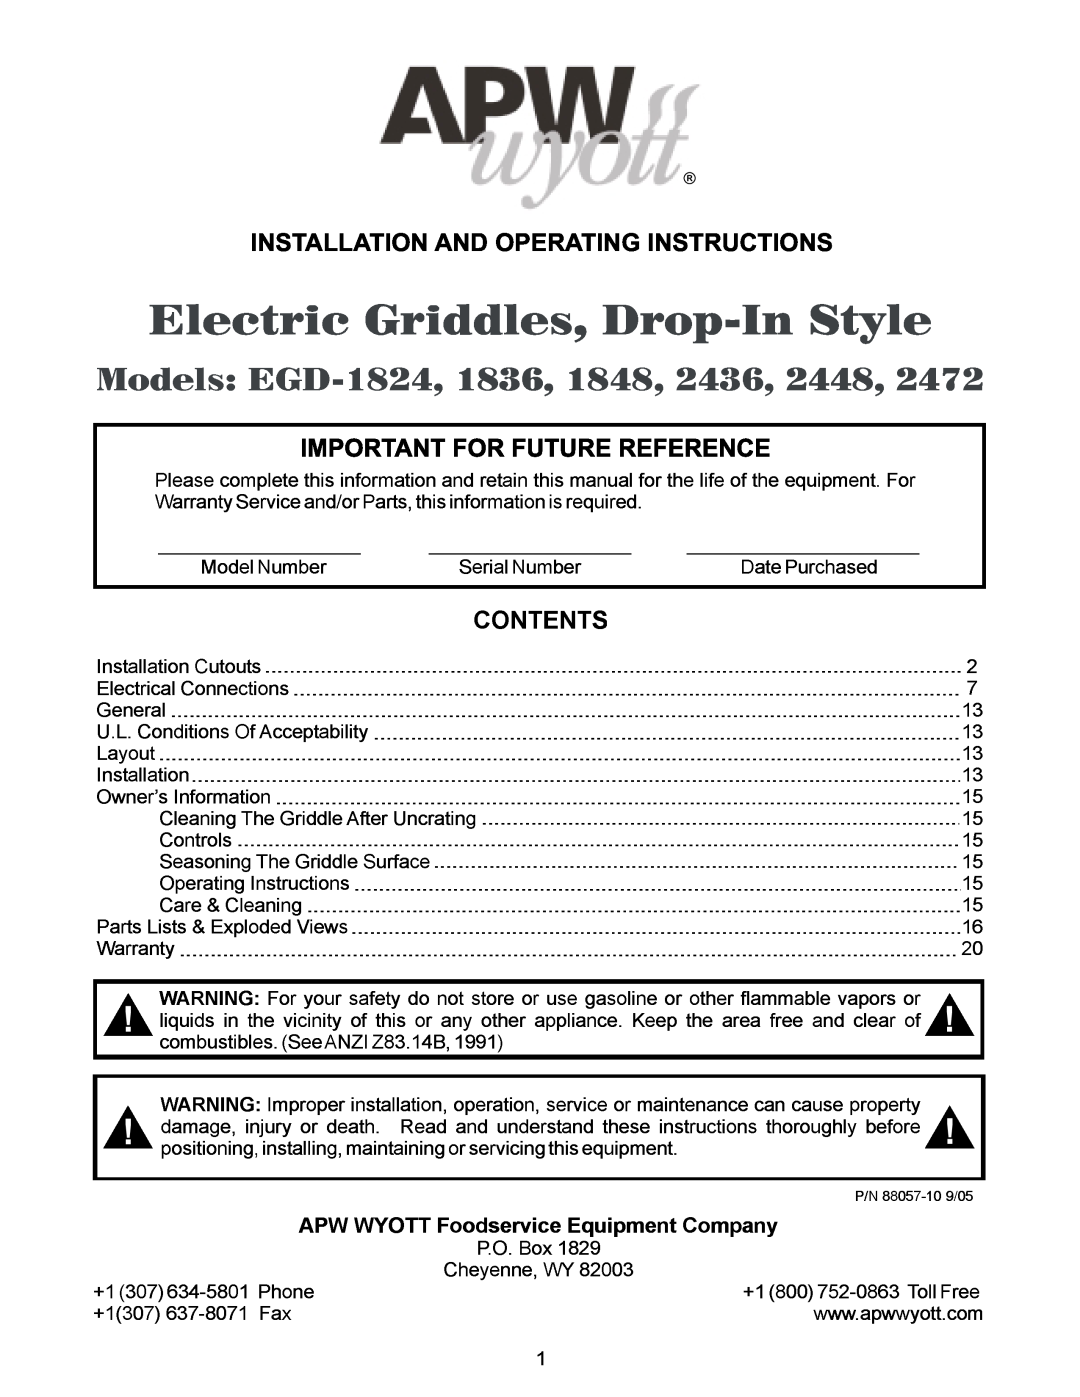 APW Wyott 2472 operating instructions P/N88057-10!9/05, area, Gneral, TheGriddleSurface, Contents, Keep, flmmablevapors 